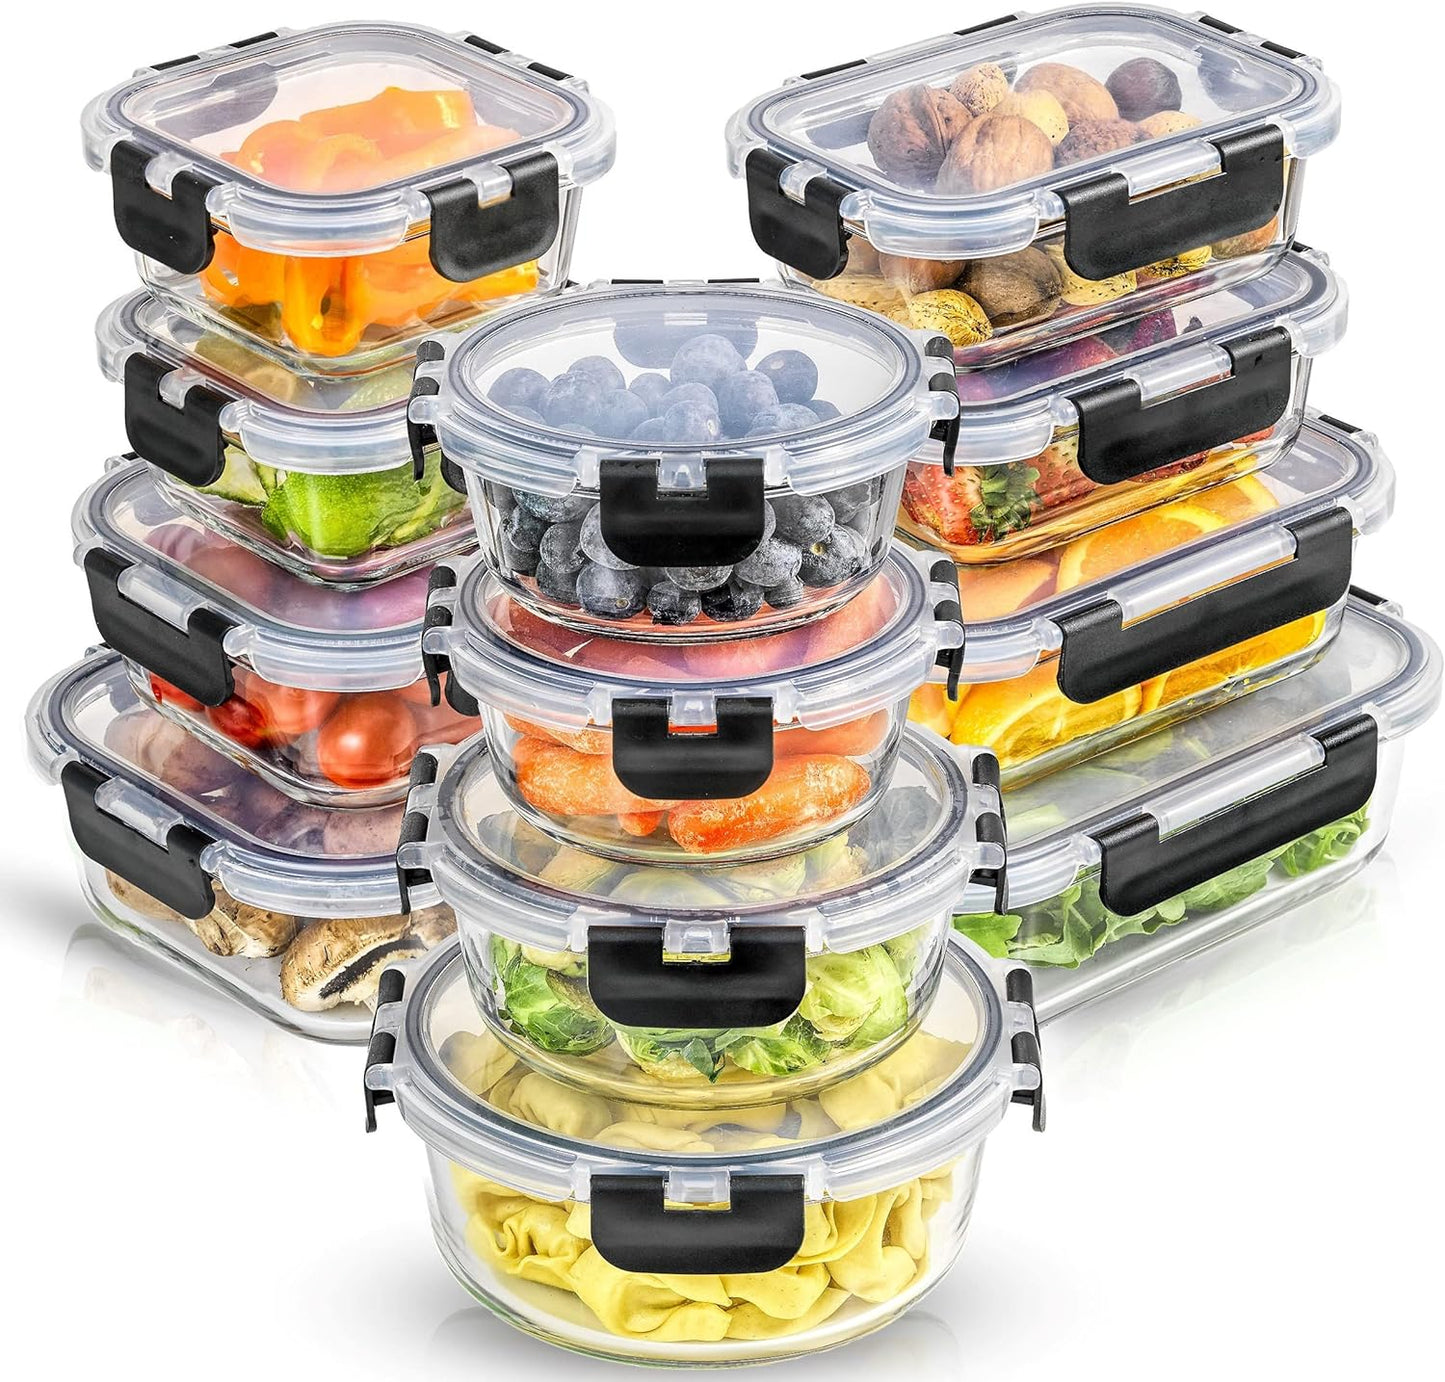 "JoyJolt JoyFul 24pc Glass Food Storage Containers - Airtight, Freezer Safe, with Lids. Perfect for Pantry, Kitchen, and Glass Meal Prep. Lunch-ready and convenient storage."